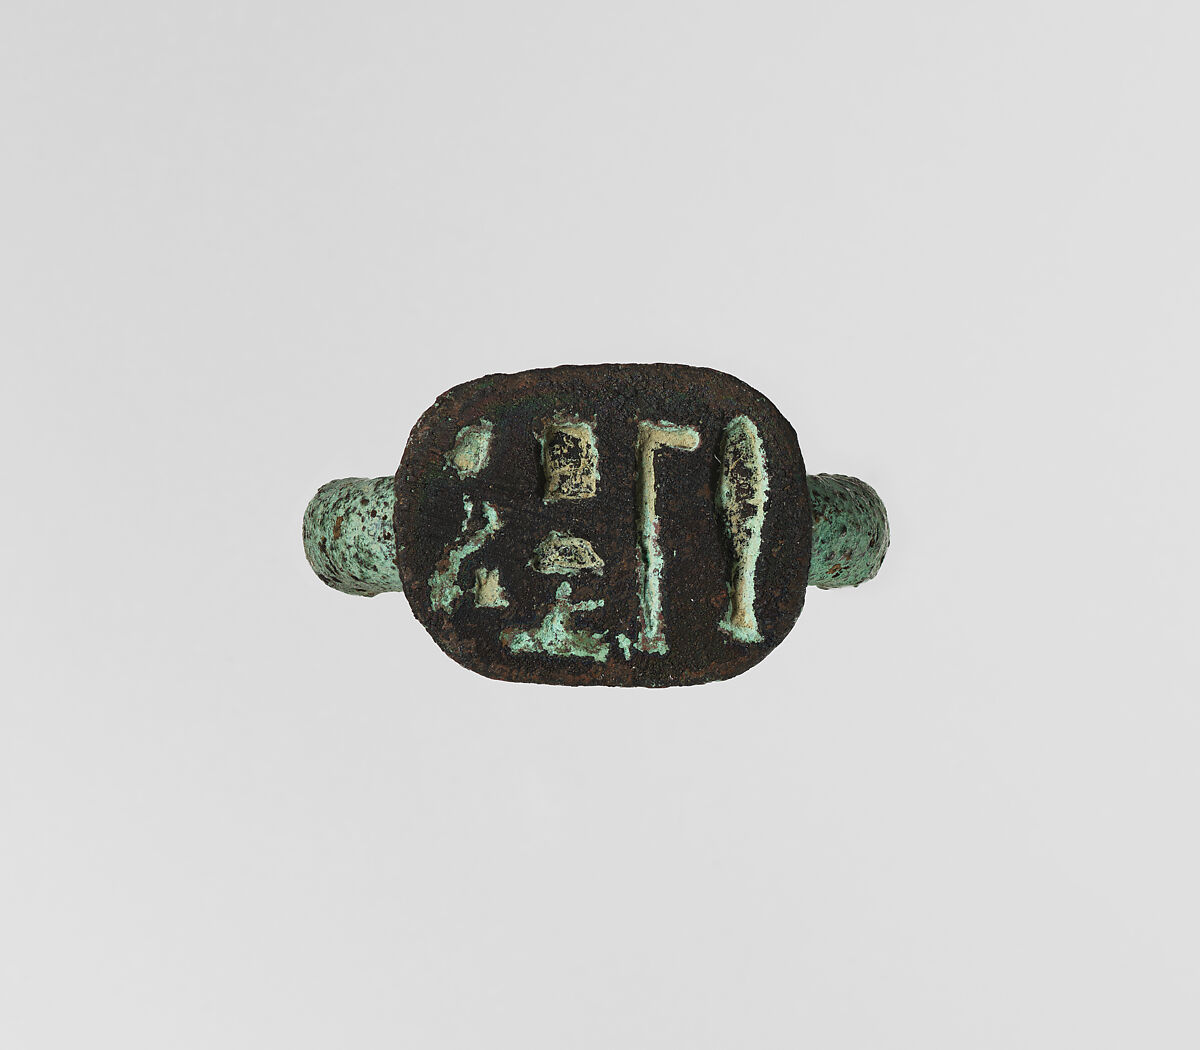 Ring, signet, Bronze or copper alloy 